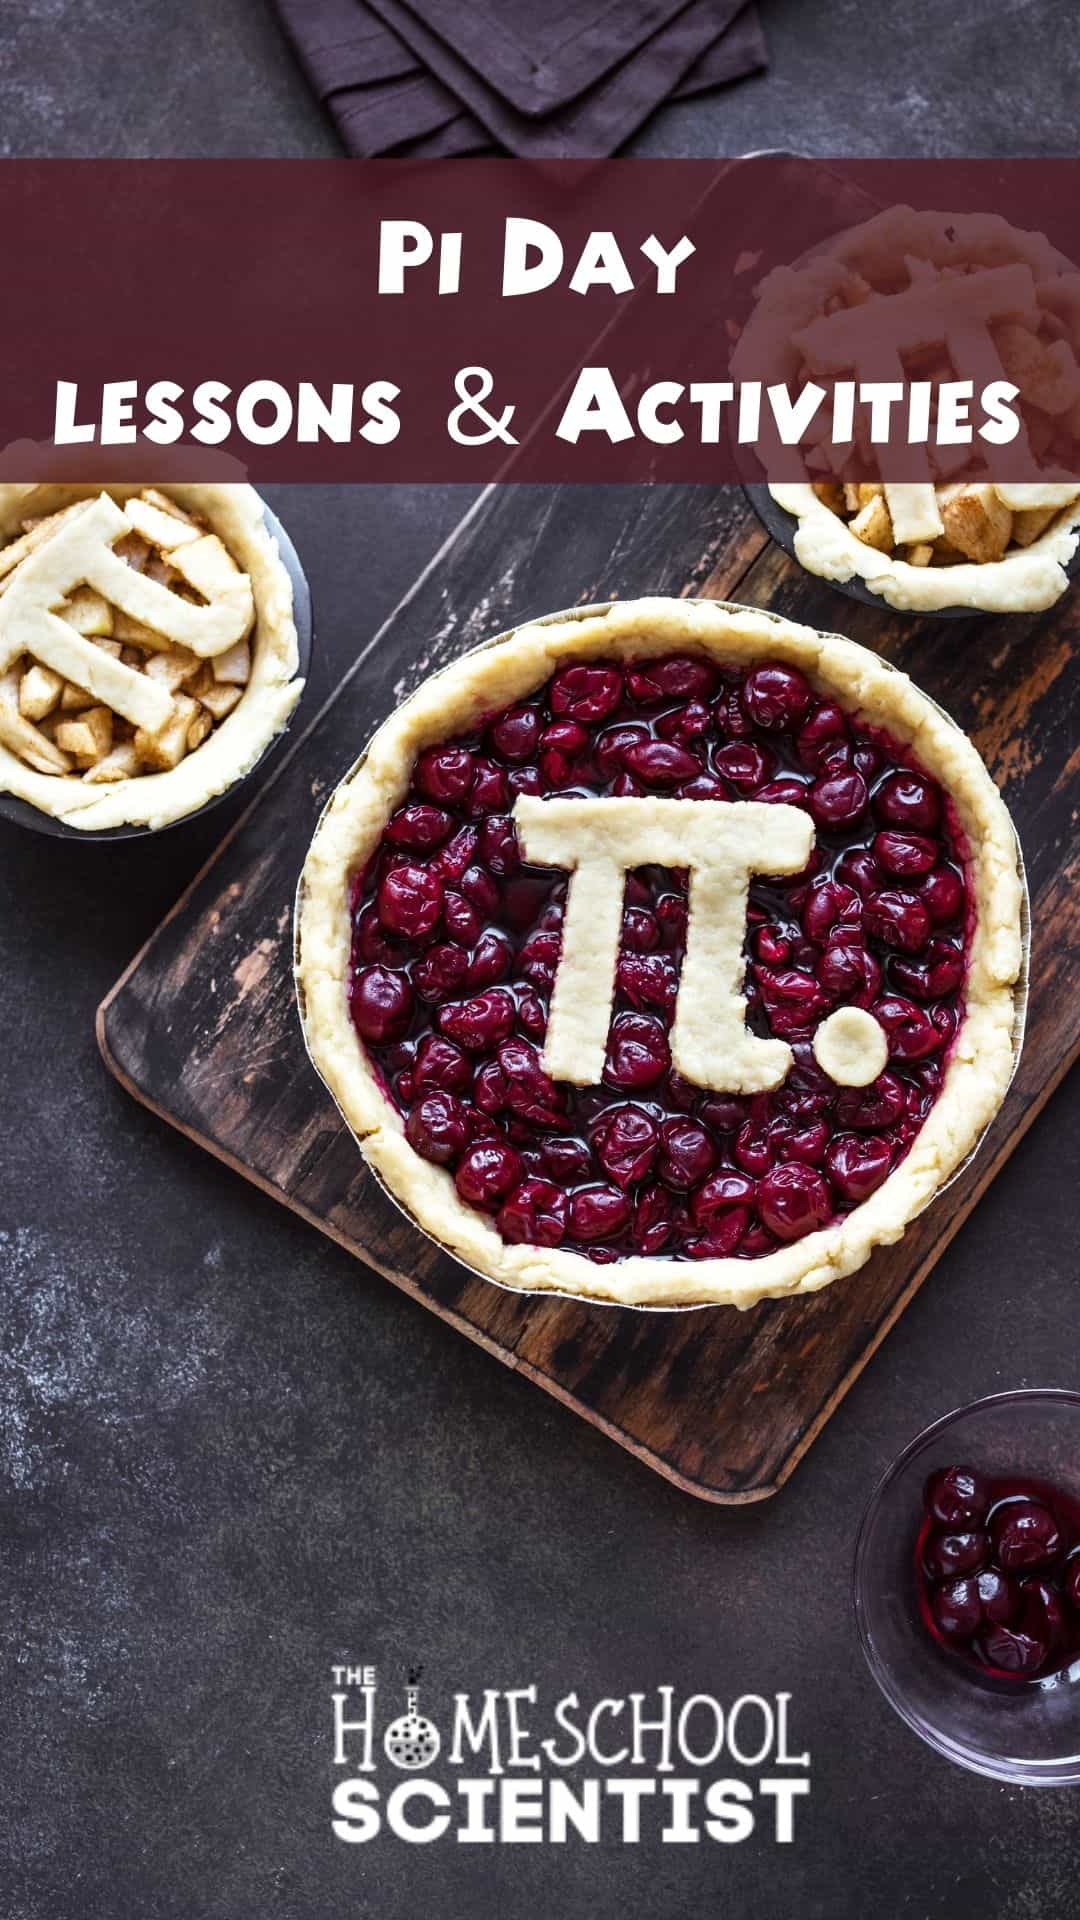 Pi Day Lessons and Activities for multiple ages.